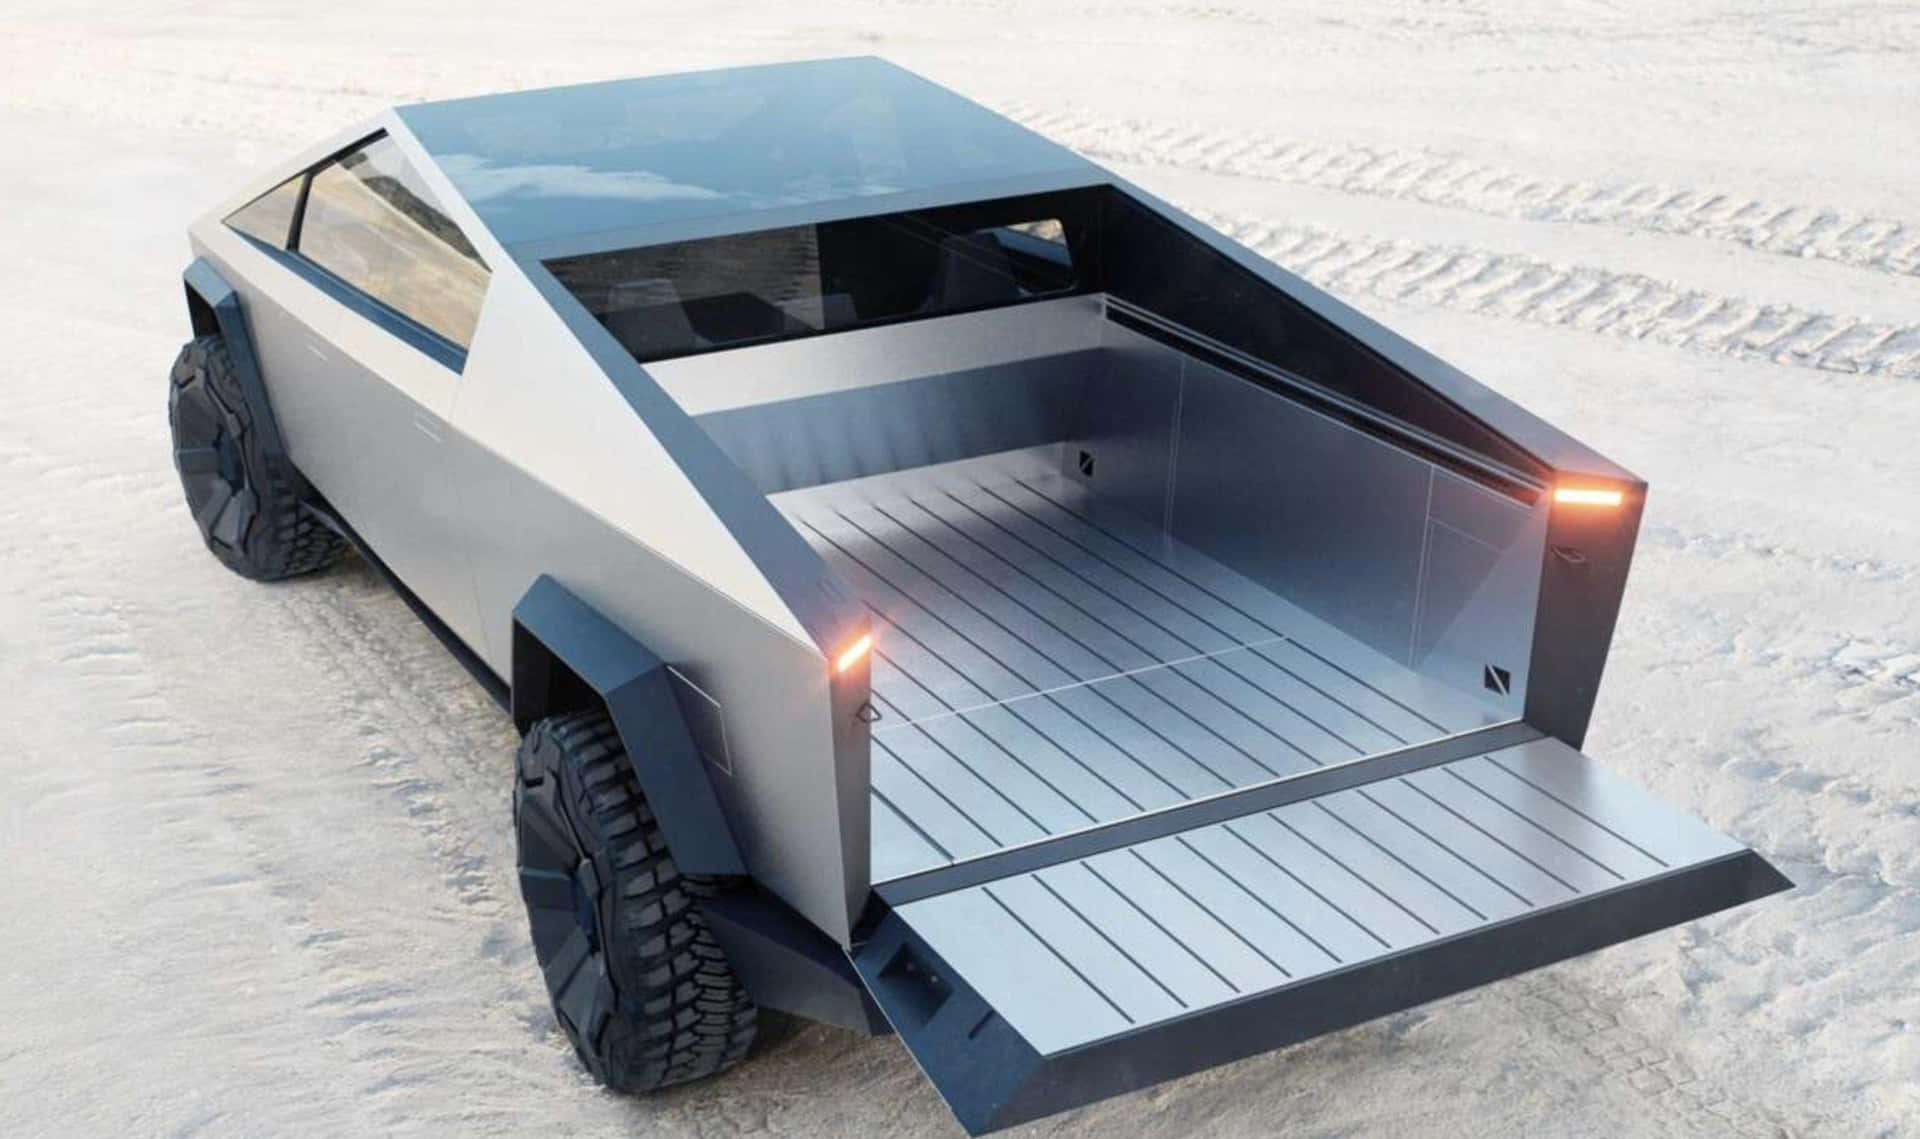 Get ready for the future in a Tesla Cybertruck